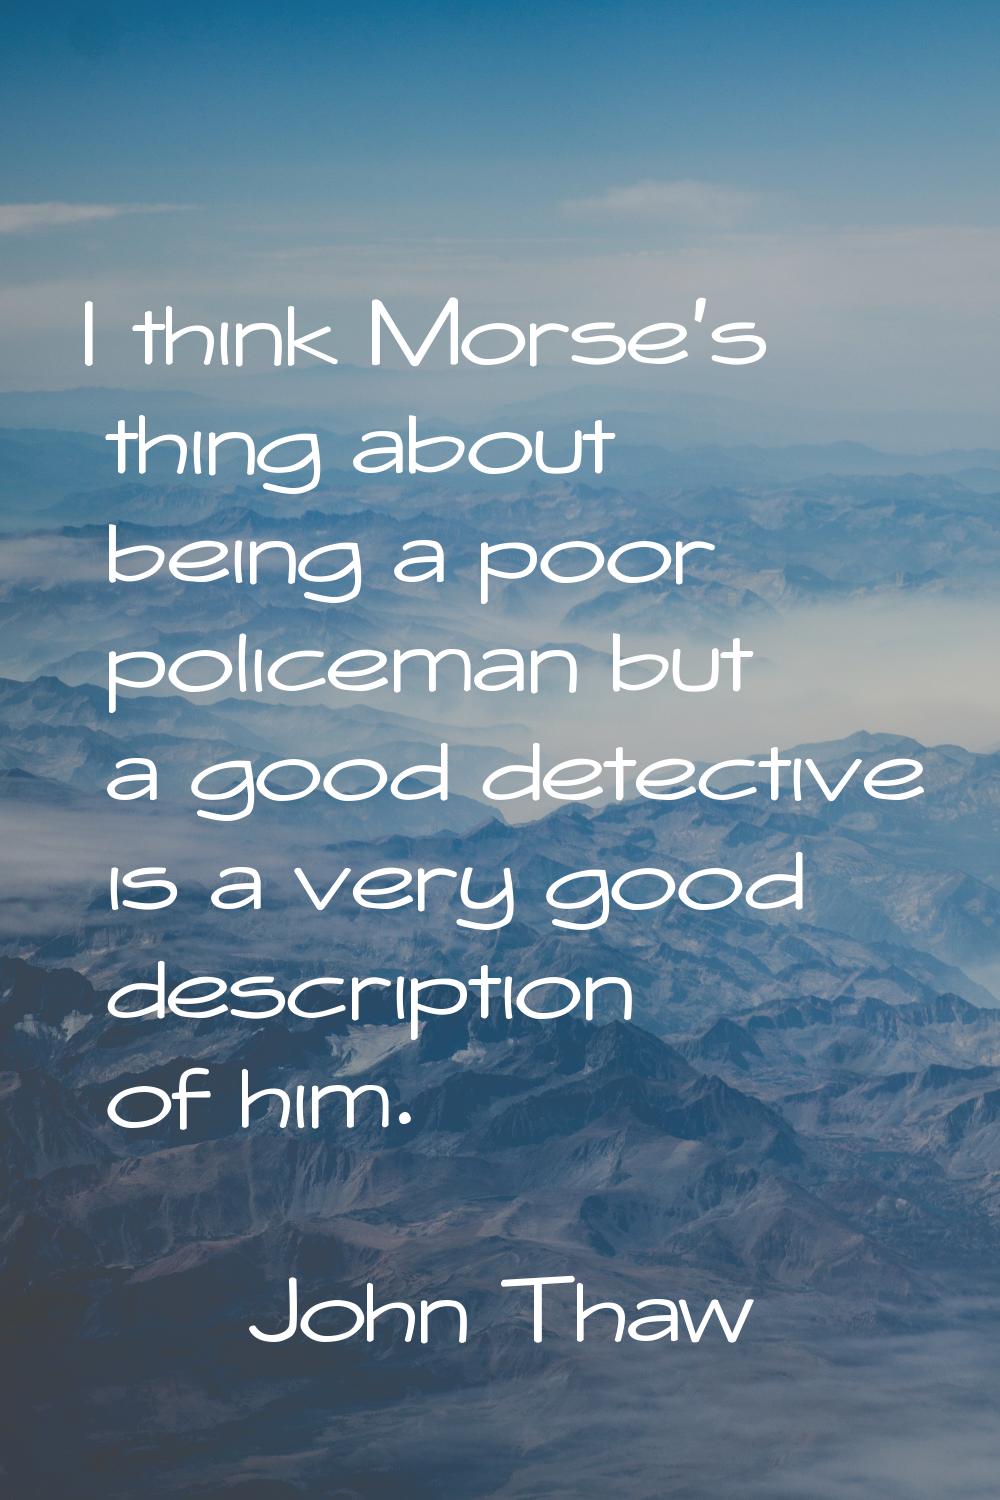 I think Morse's thing about being a poor policeman but a good detective is a very good description 